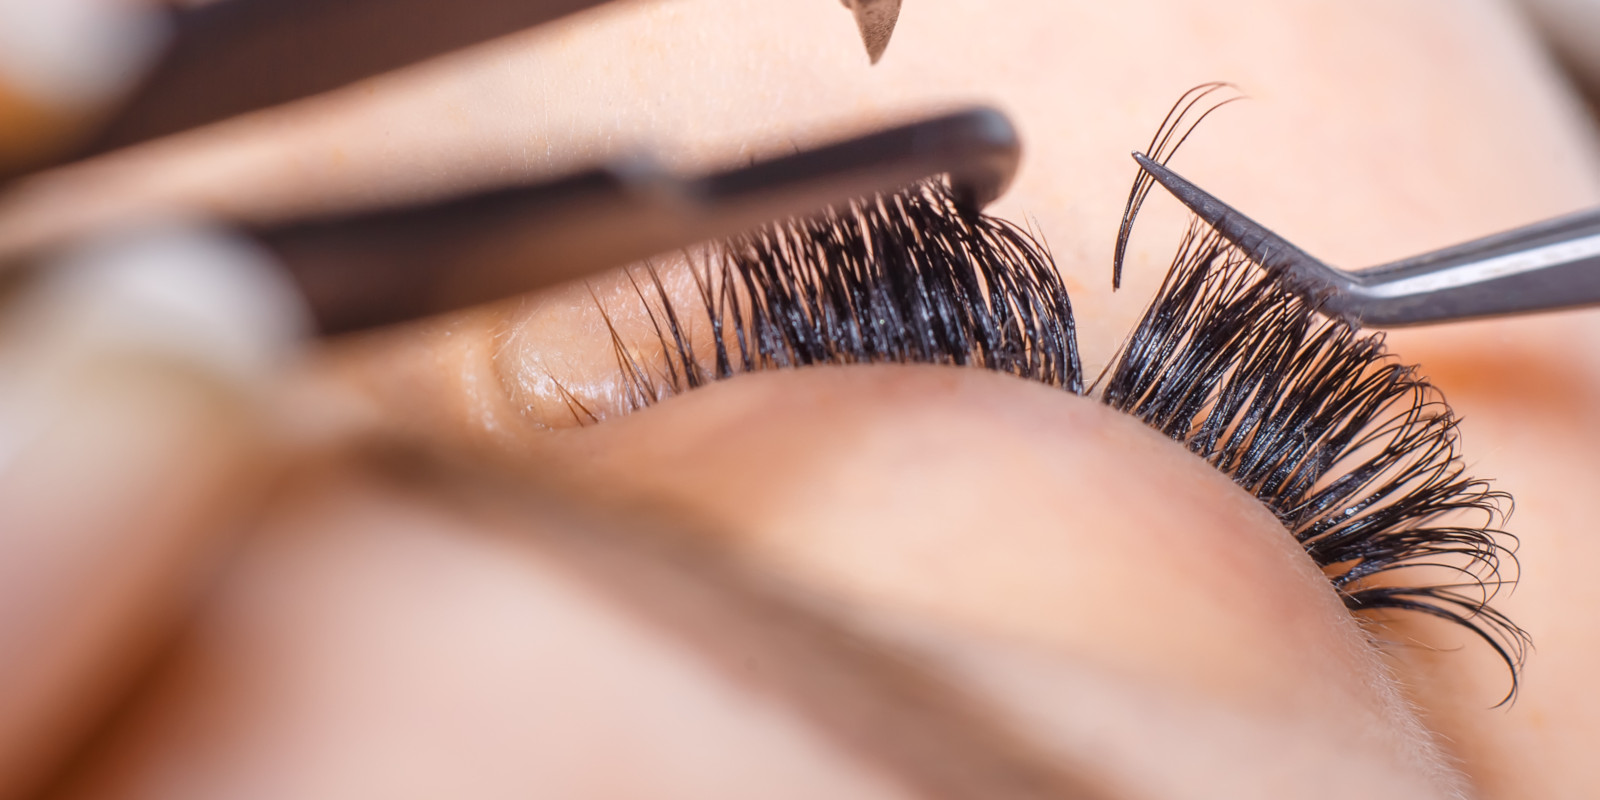 All Eyelash Extensions are NOT the Same (and Here’s Why)